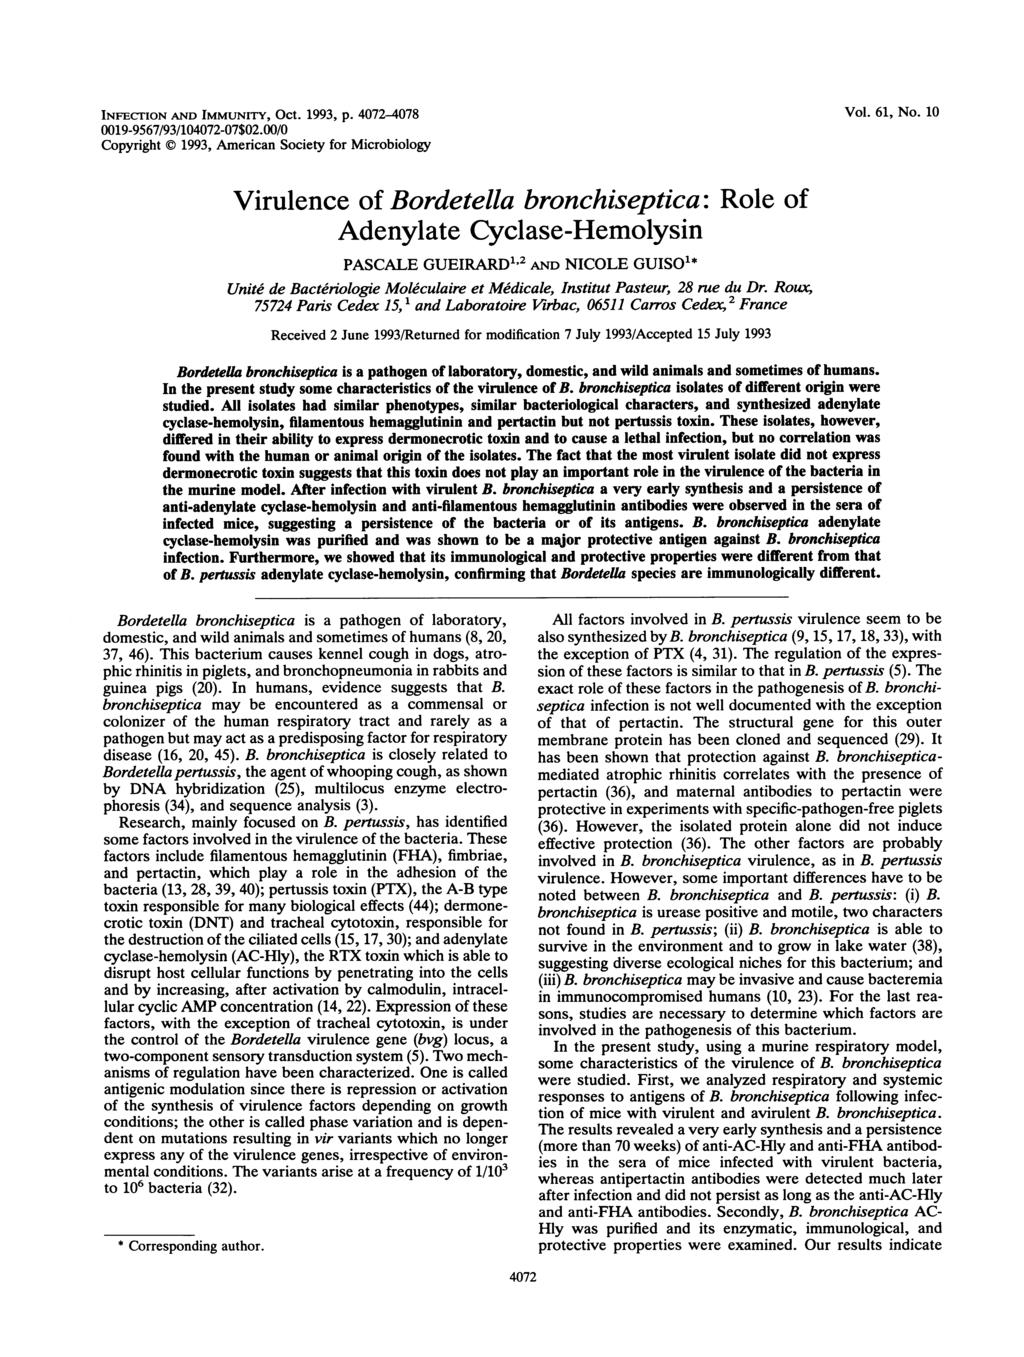 INFEcrION AND IMMUNITY, OCt. 1993, p. 472-478 Vol. 61, No. 1 19-9567/93/1472-7$2.